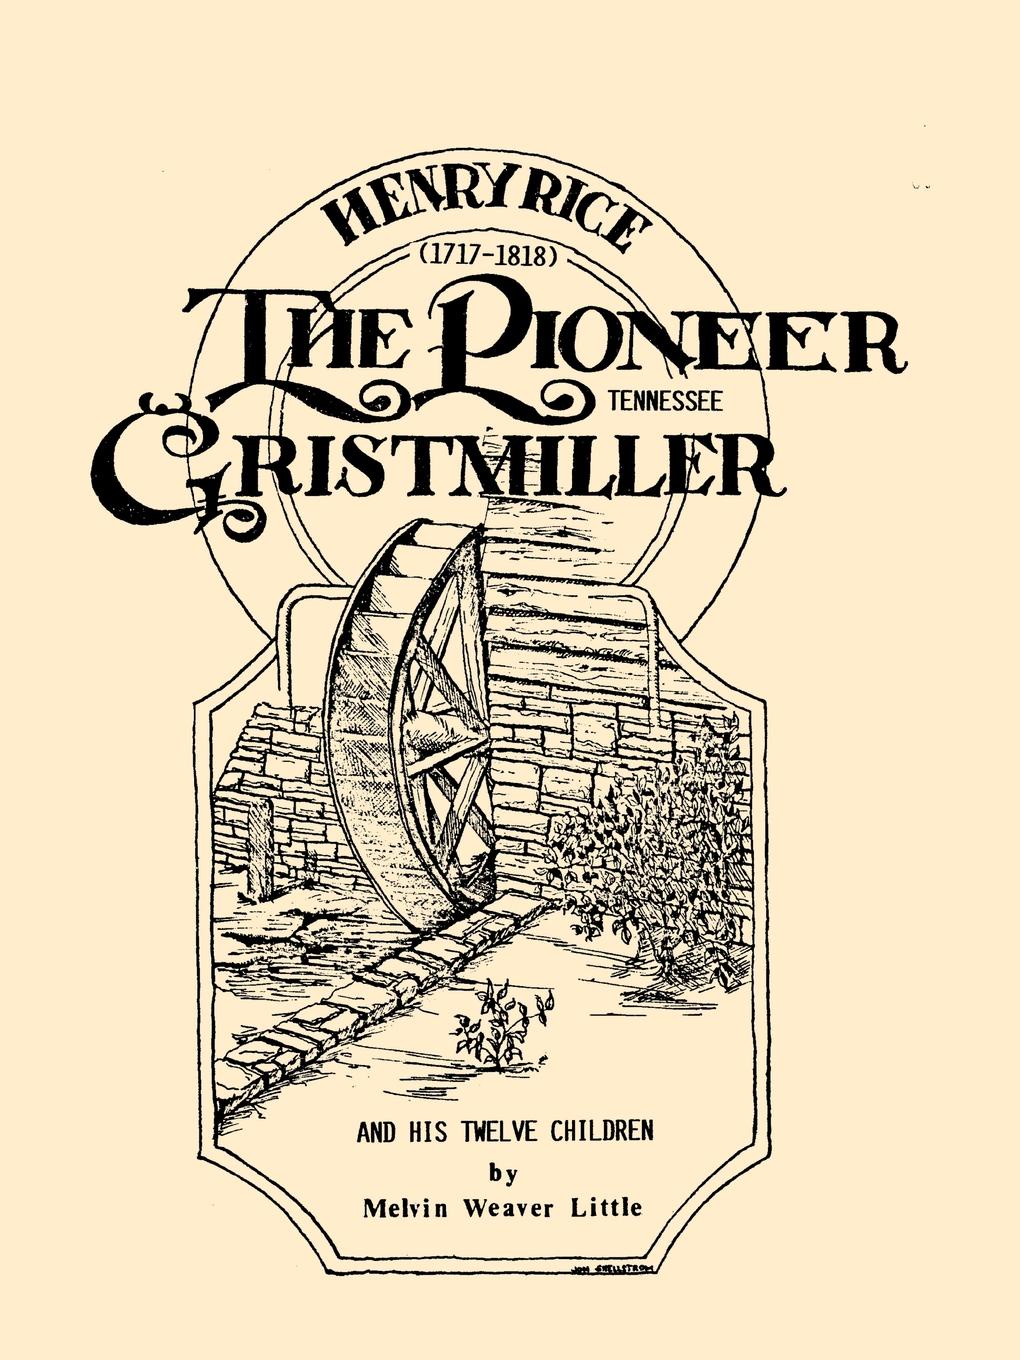 Henry Rice, (1717-1818), The Pioneer Tennessee Gristmiller and His Twelve Children